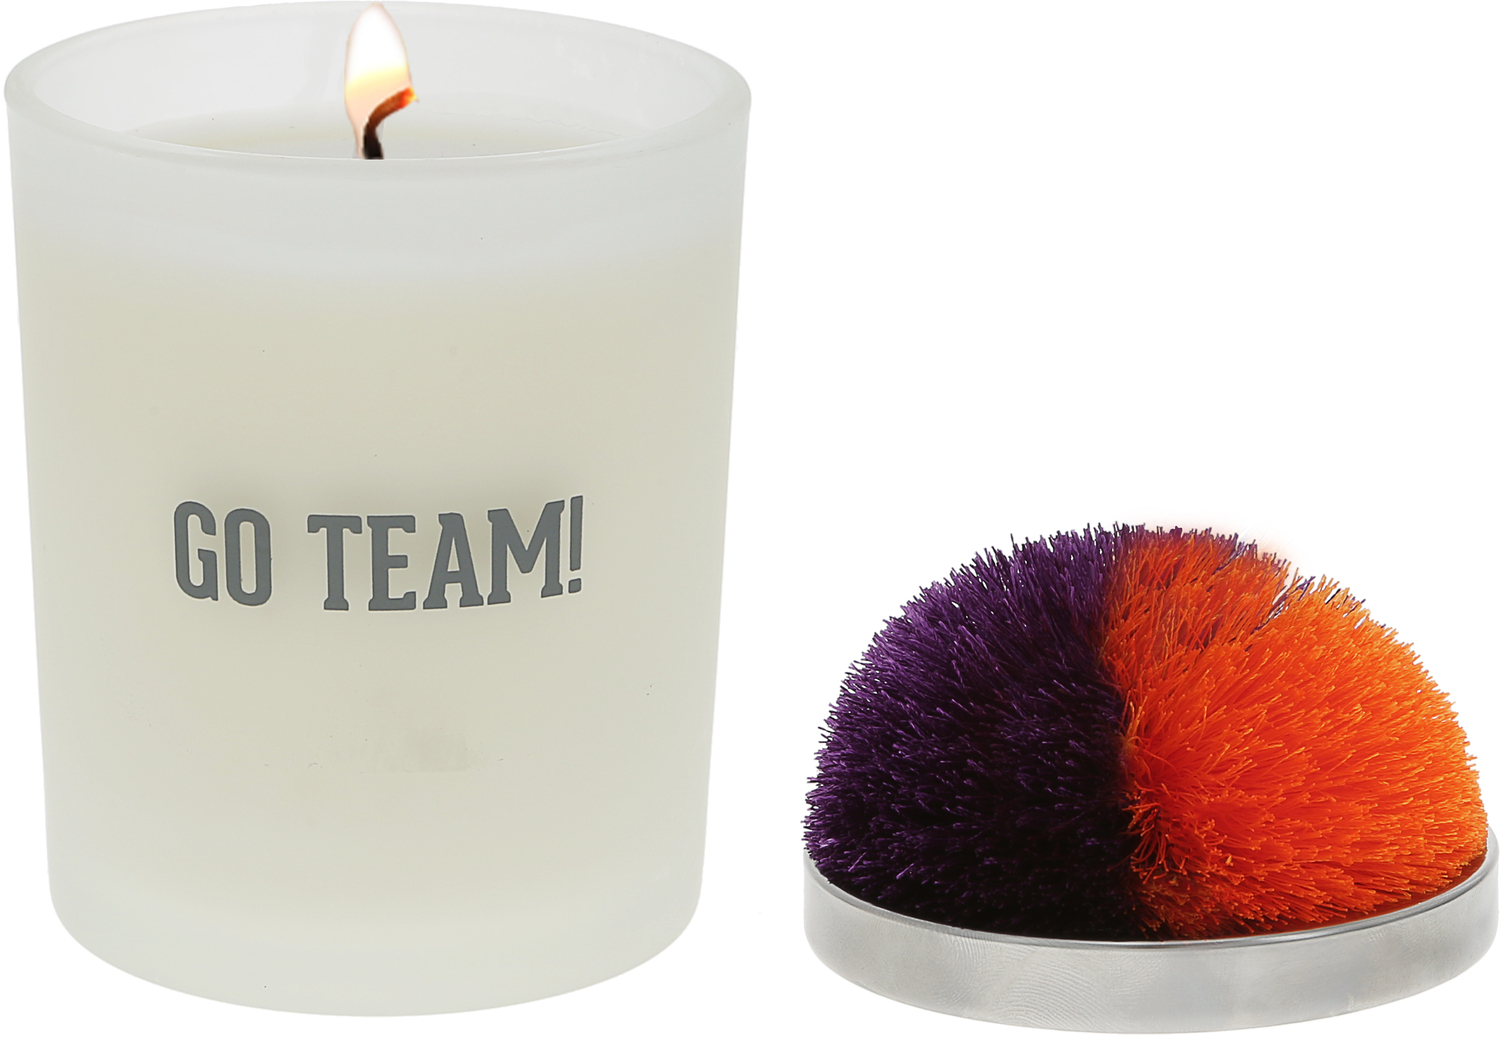 Go Team! - Purple & Orange by Repre-Scent - Go Team! - Purple & Orange - 5.5 oz - 100% Soy Wax Candle with Pom Pom Lid
Scent: Tranquility